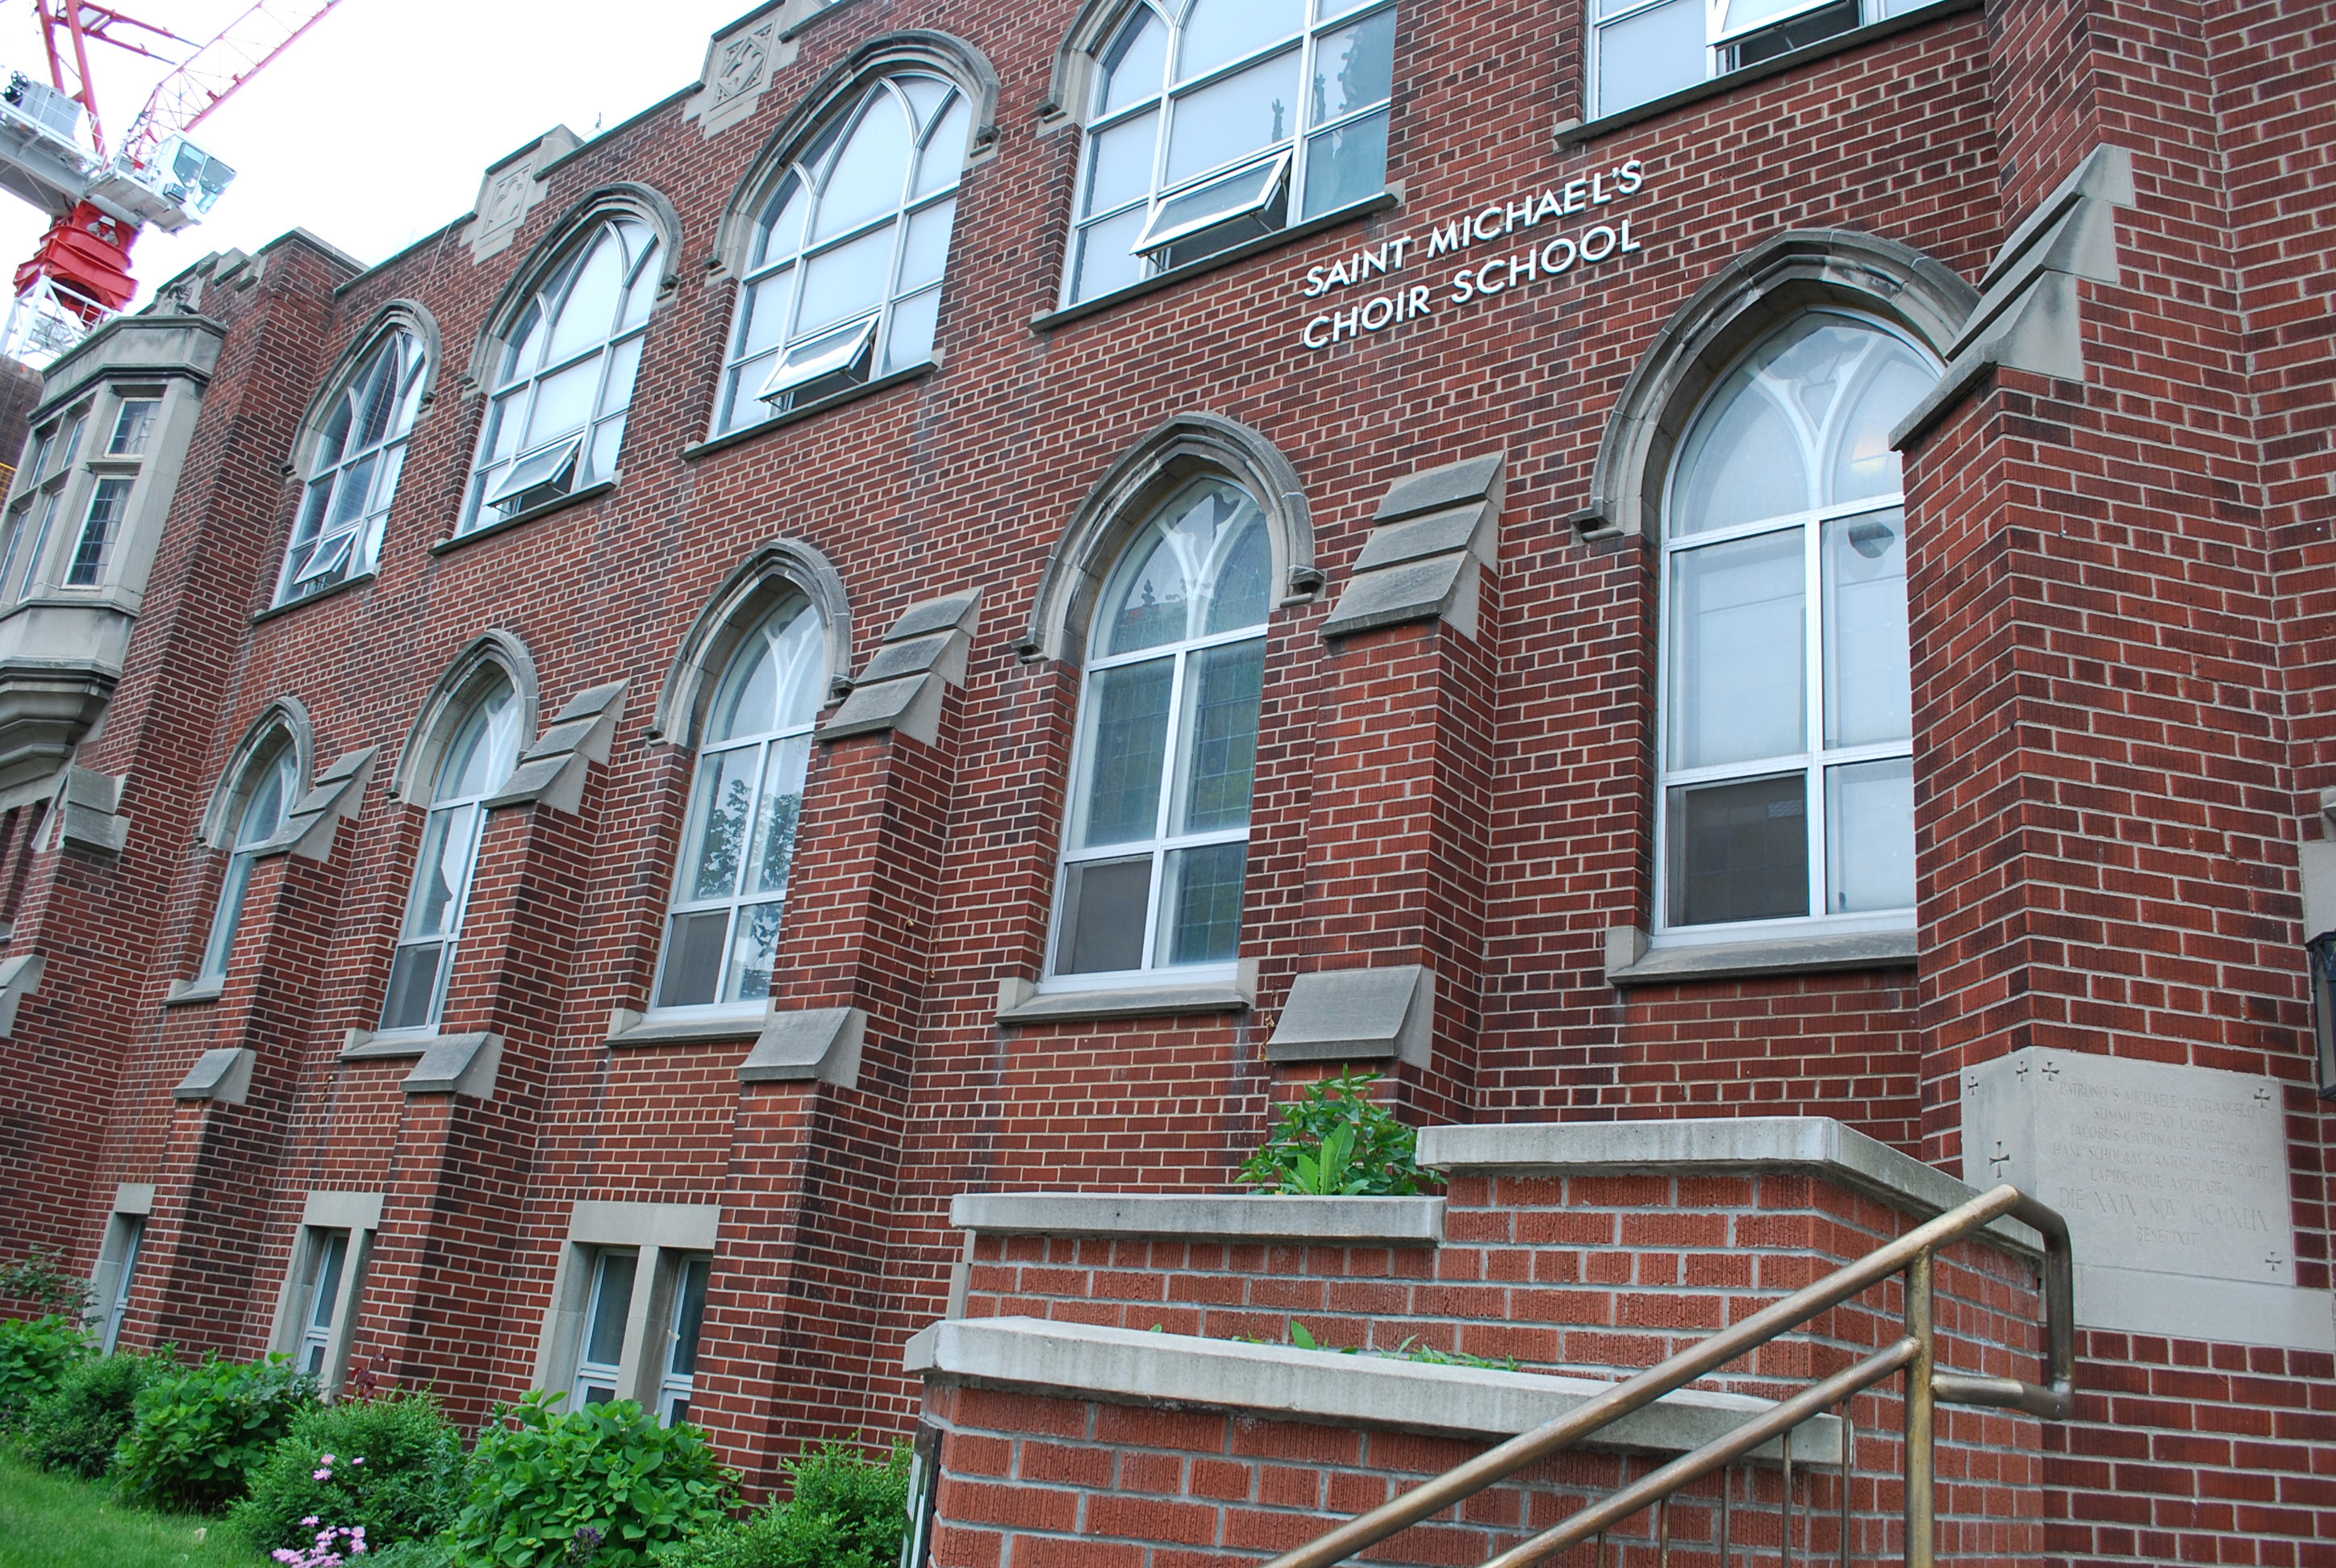 The front of the St. Michael’s Choir School building.